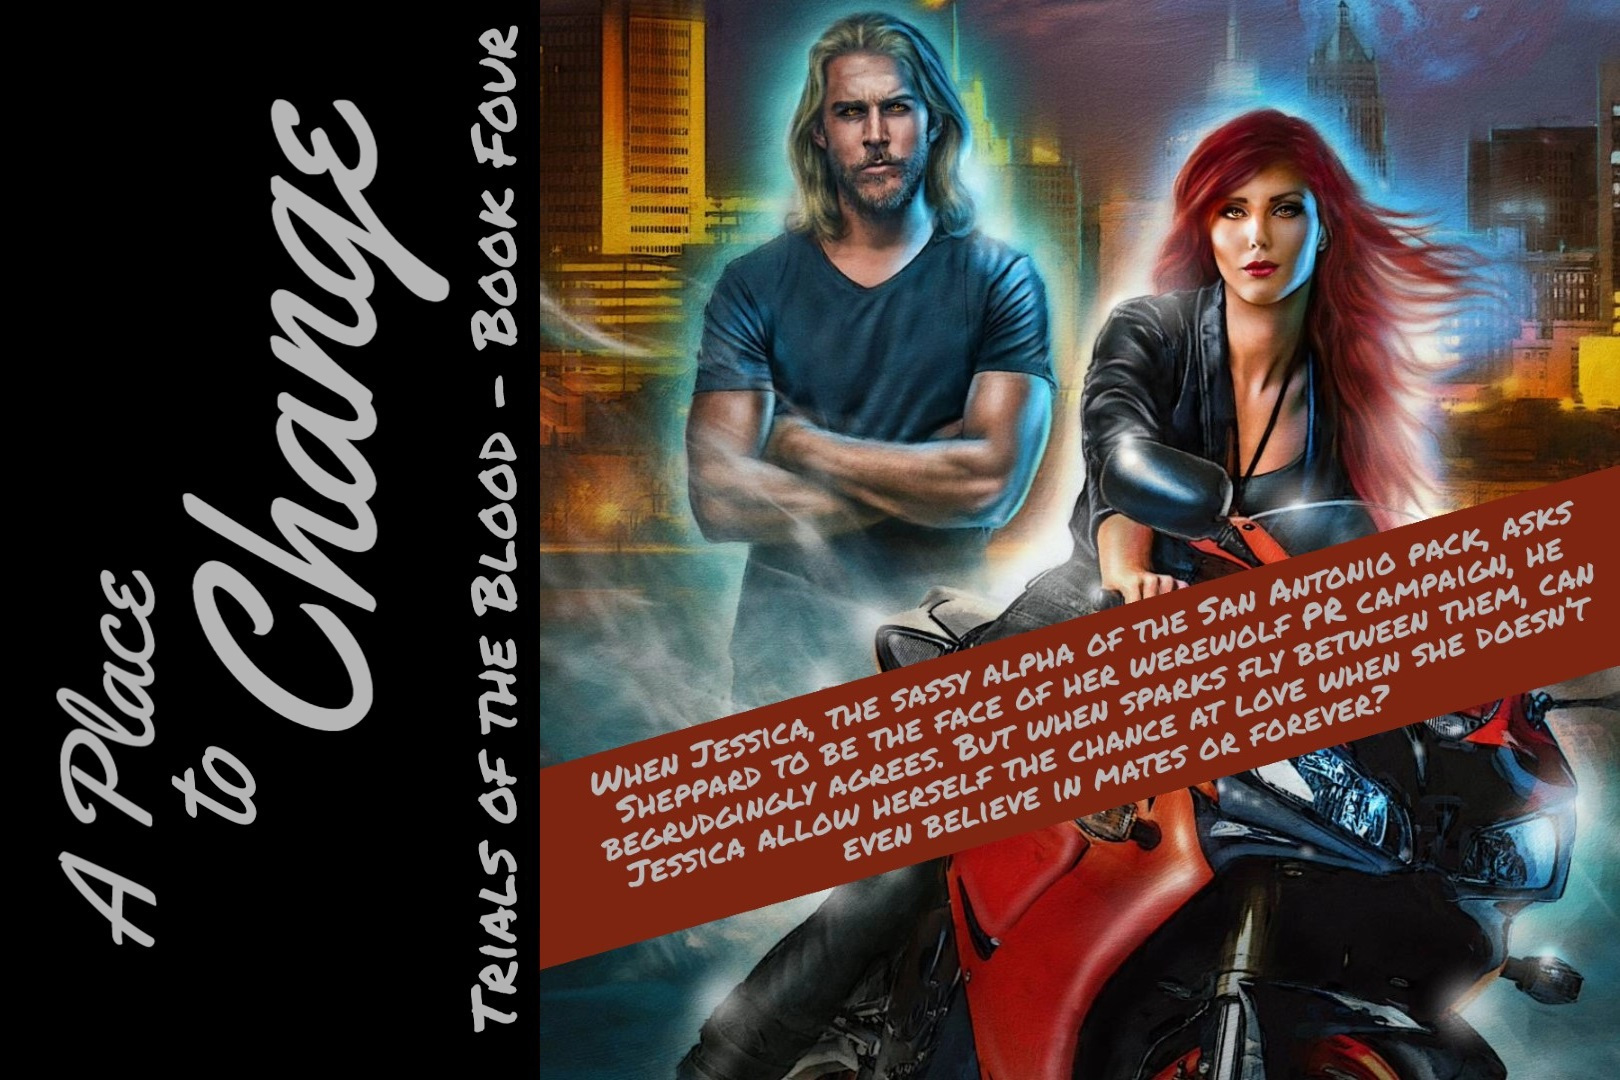 A PLACE TO CHANGE - TRIALS OF THE BLOOD, BOOK FOUR - When Sheppard meets Jessica, the sassy alpha of the South Texas pack, he can't deny the connection between them. But can he claim her as his own if she doesn't even believe in mates or forever?